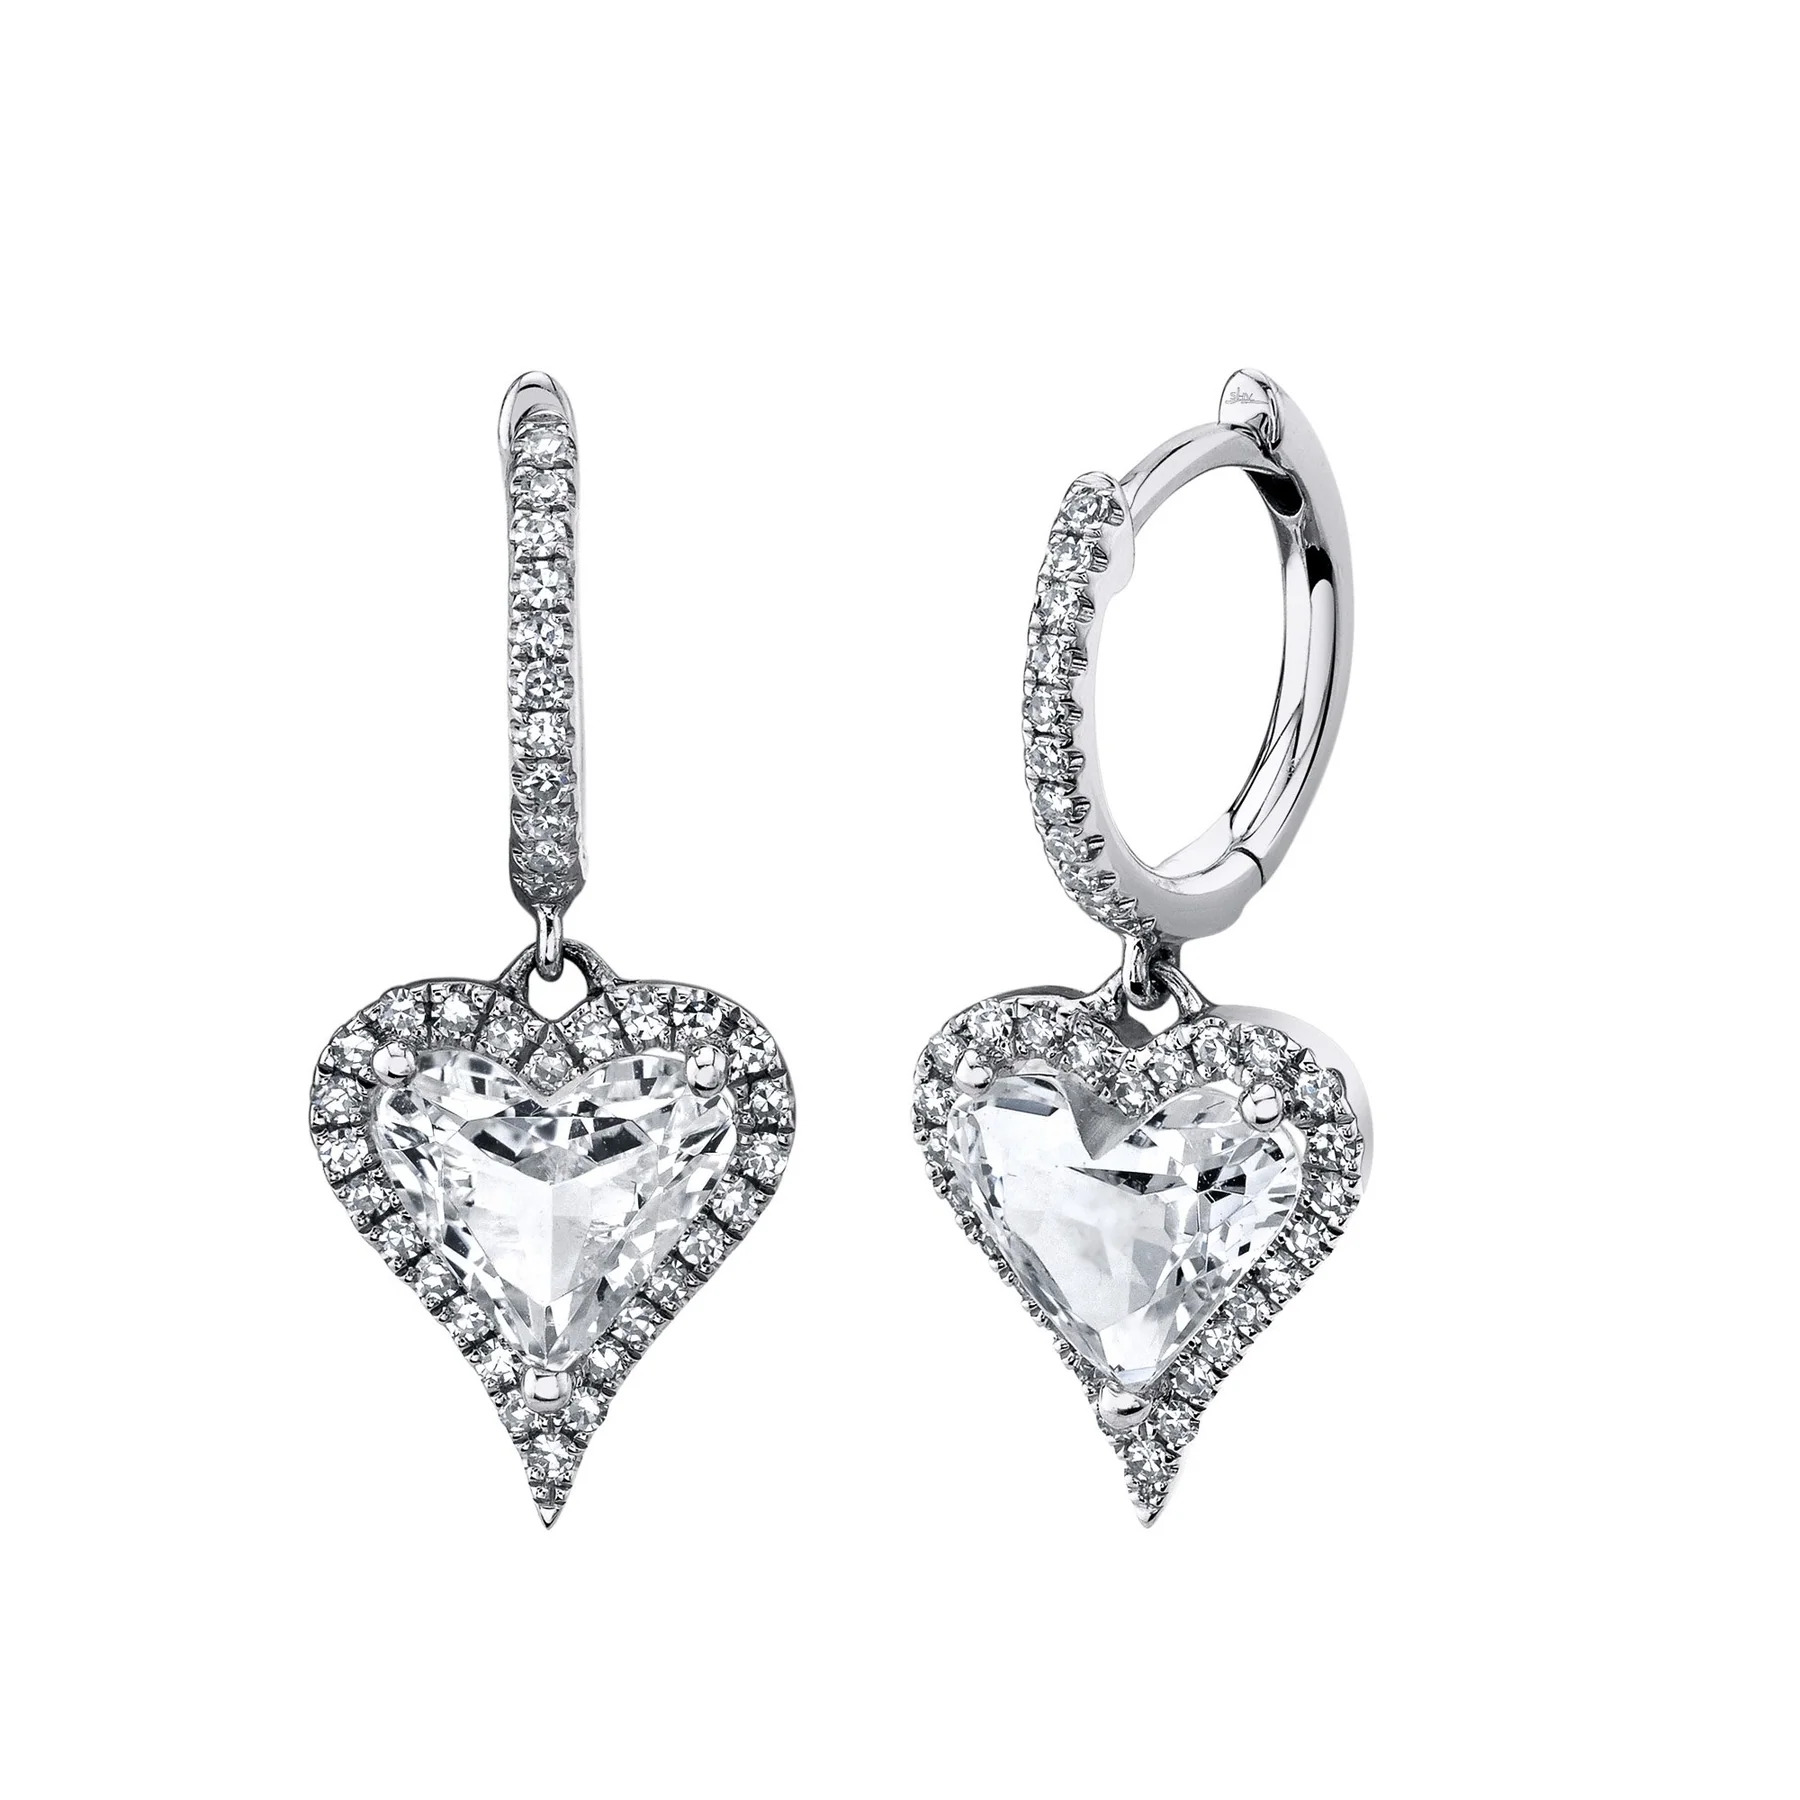 Two white gold earrings featuring a central heart shape with a white topaz gemstone and surrounded by diamonds. The heart-shaped pendant hangs from the earring band with diamonds.